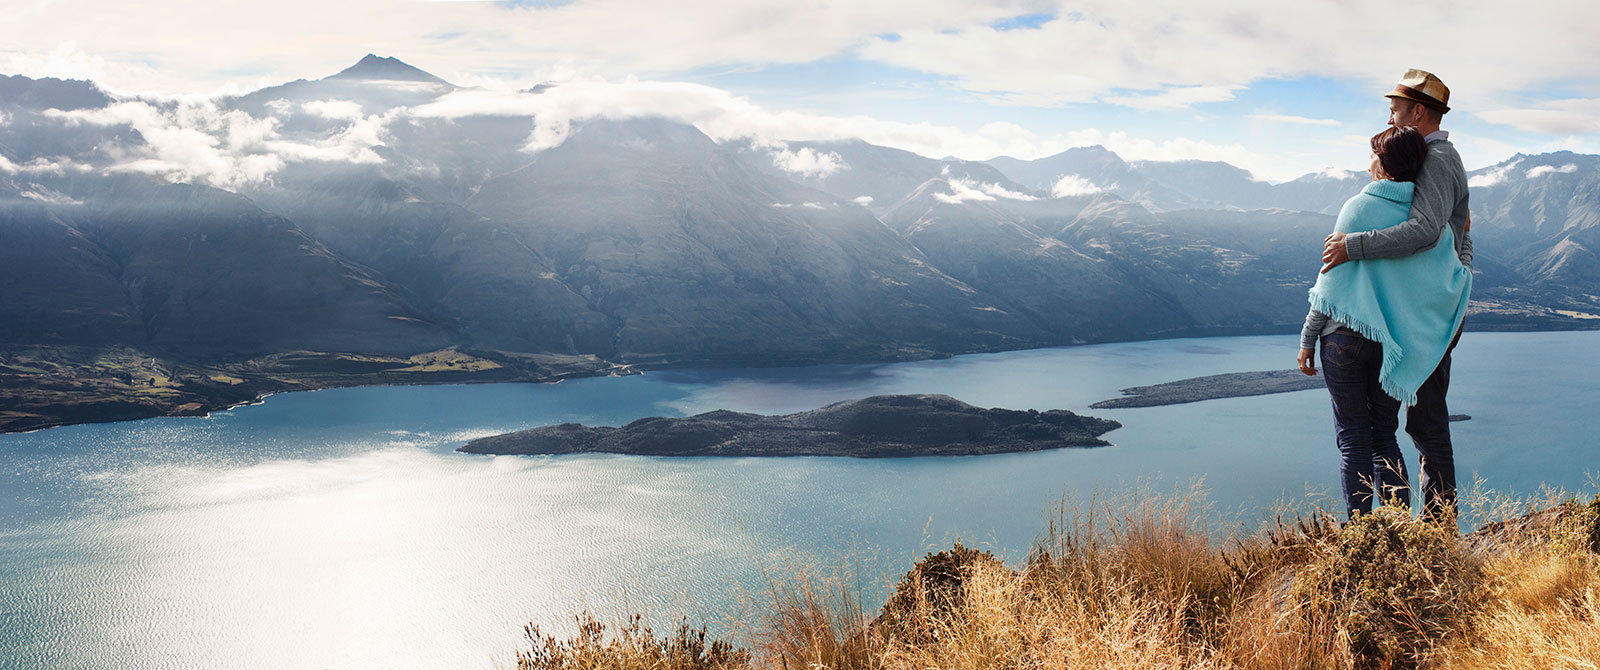 Mountain Views in Queenstown - Book Your Trip to New Zealand - New Zealand Travel Agency